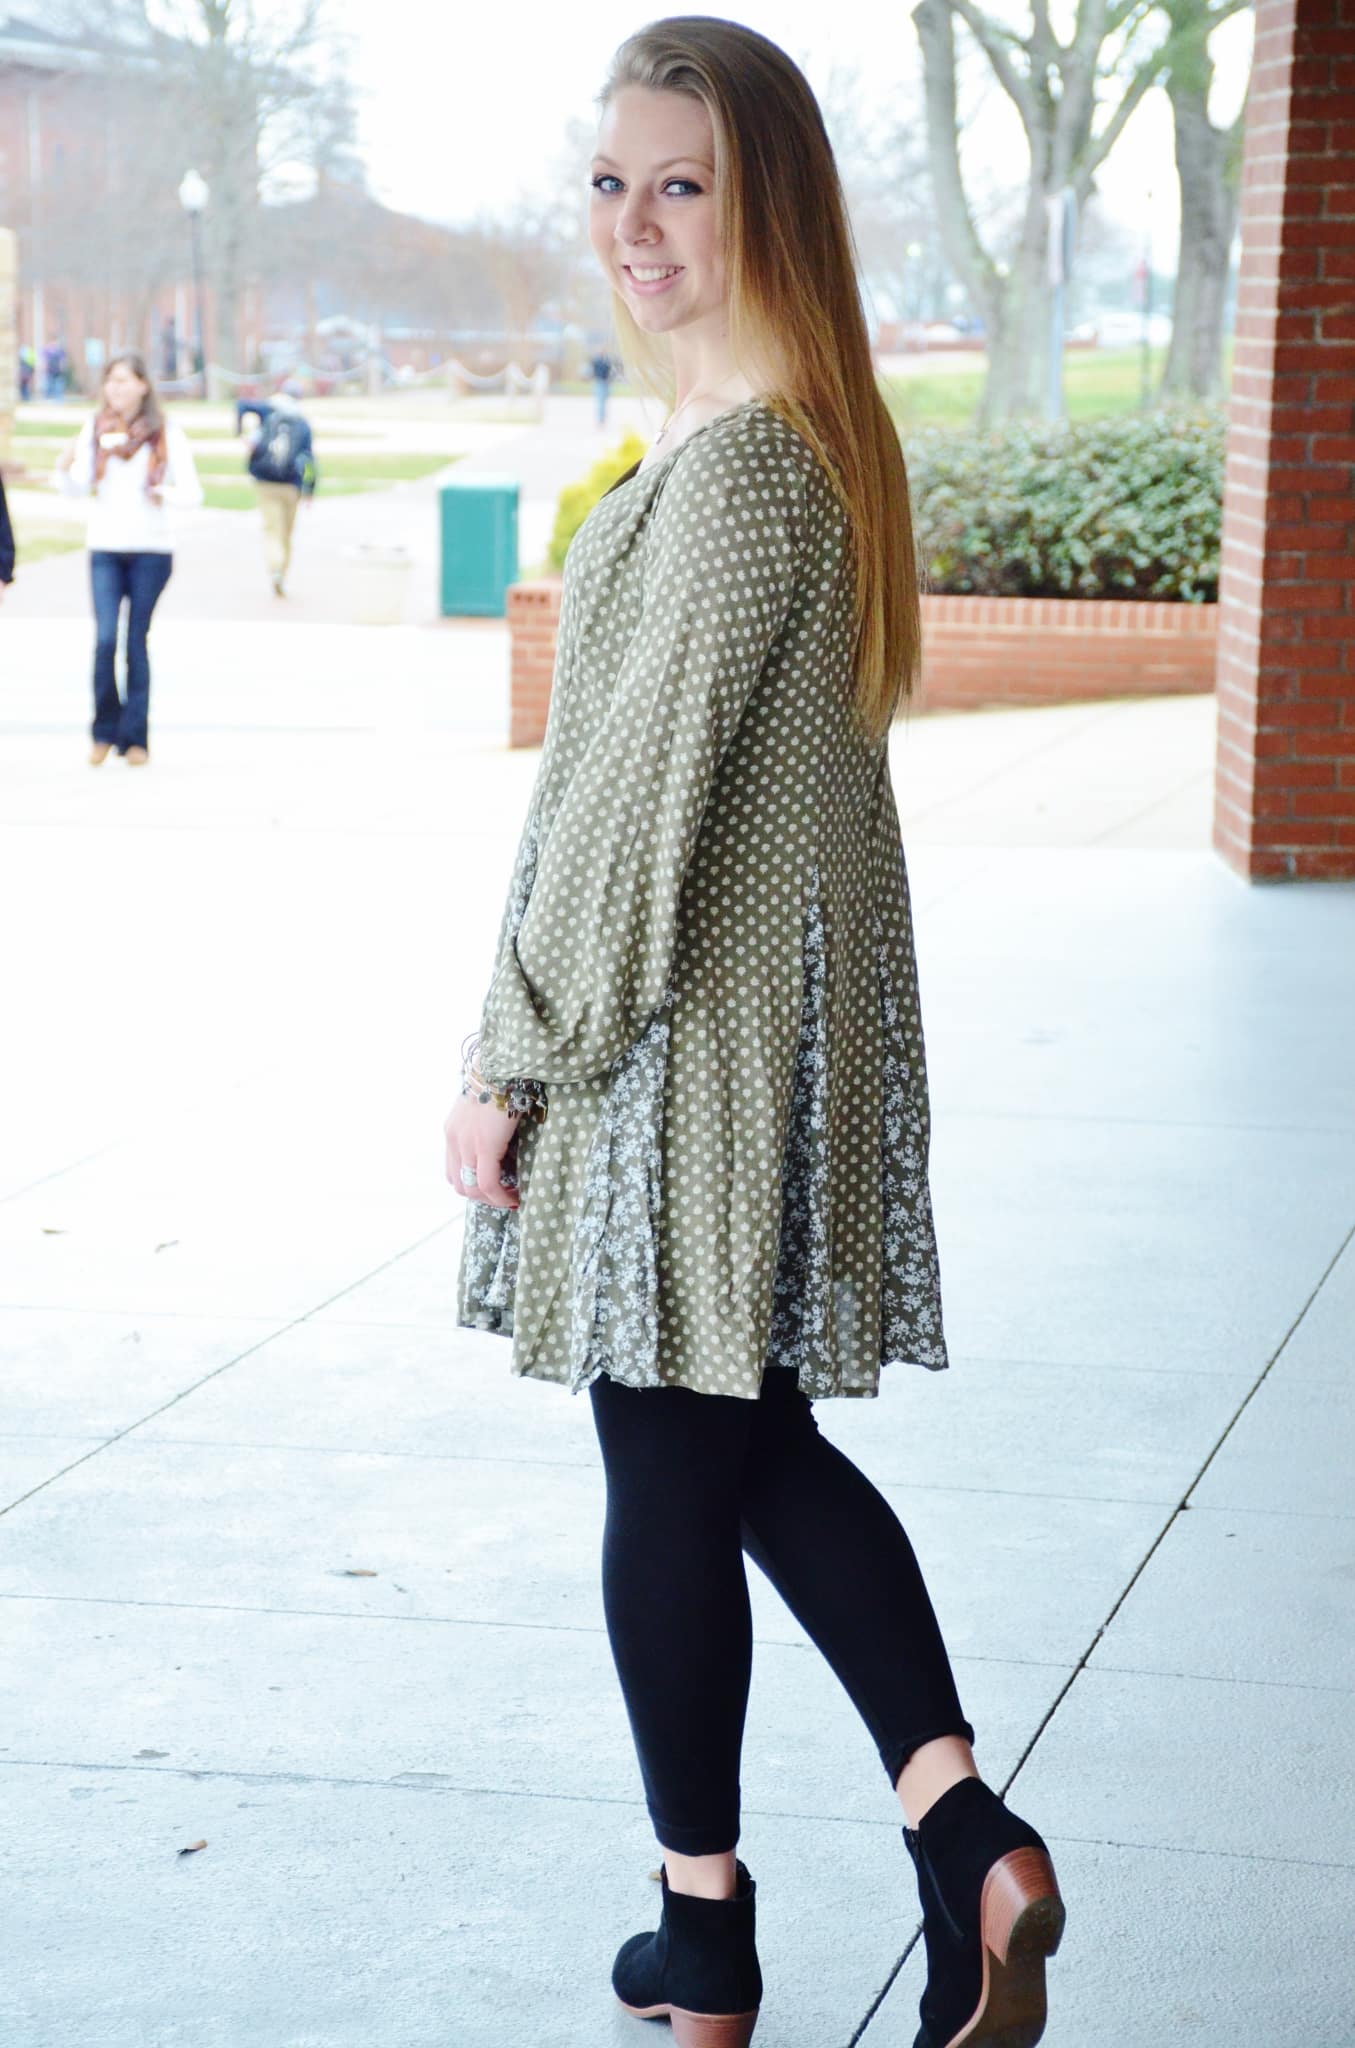 Jessi Varner knows how to stay fashionable in the winter with her long sleeved casual dress from Southern Charm along with the ankle high Jack Roger booties.&nbsp;